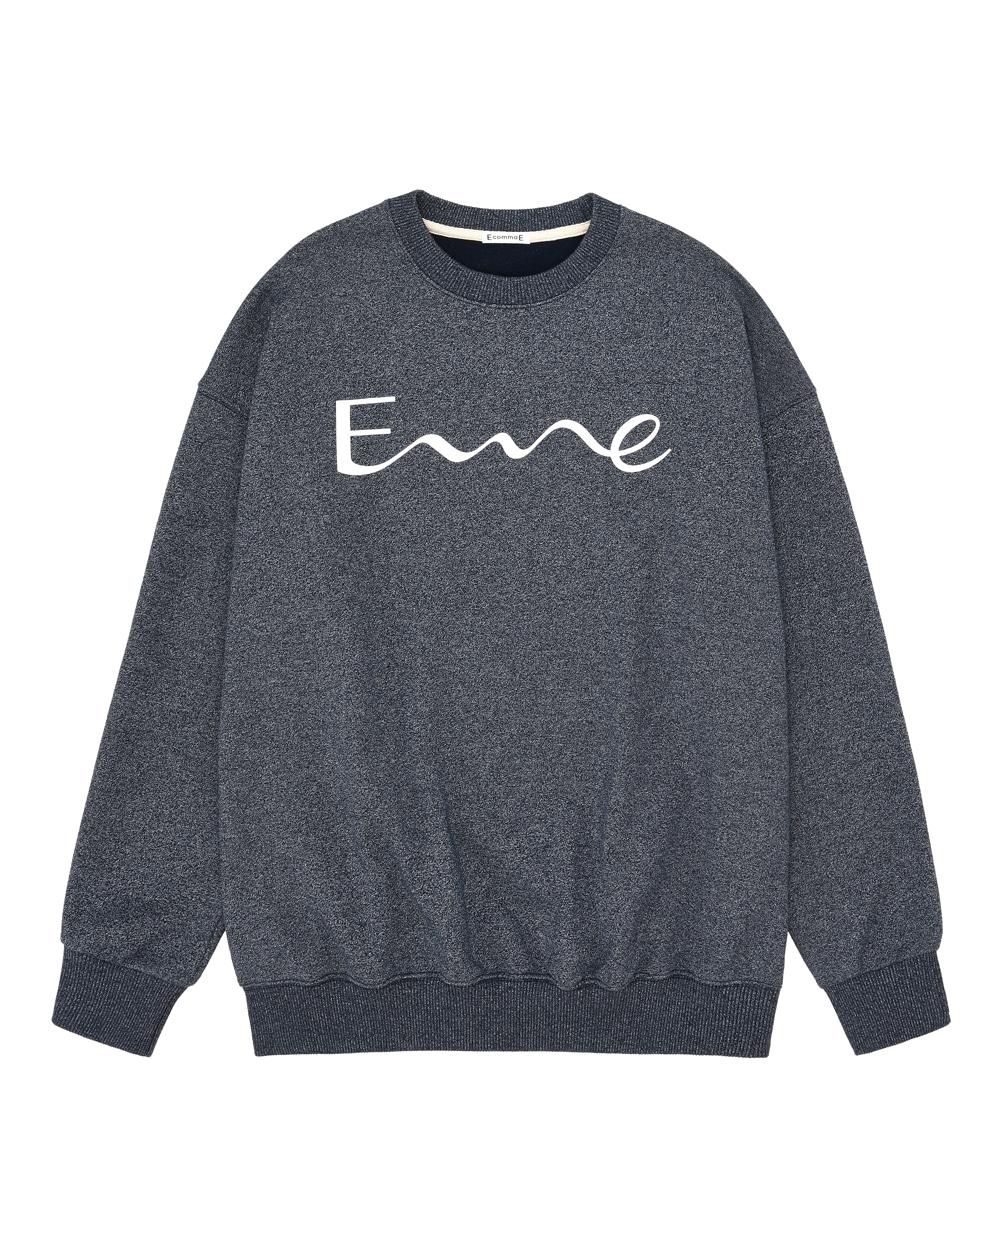 SIGNATURE OVER SIZED SWEAT-SHIRT (NAVY) (3colors)